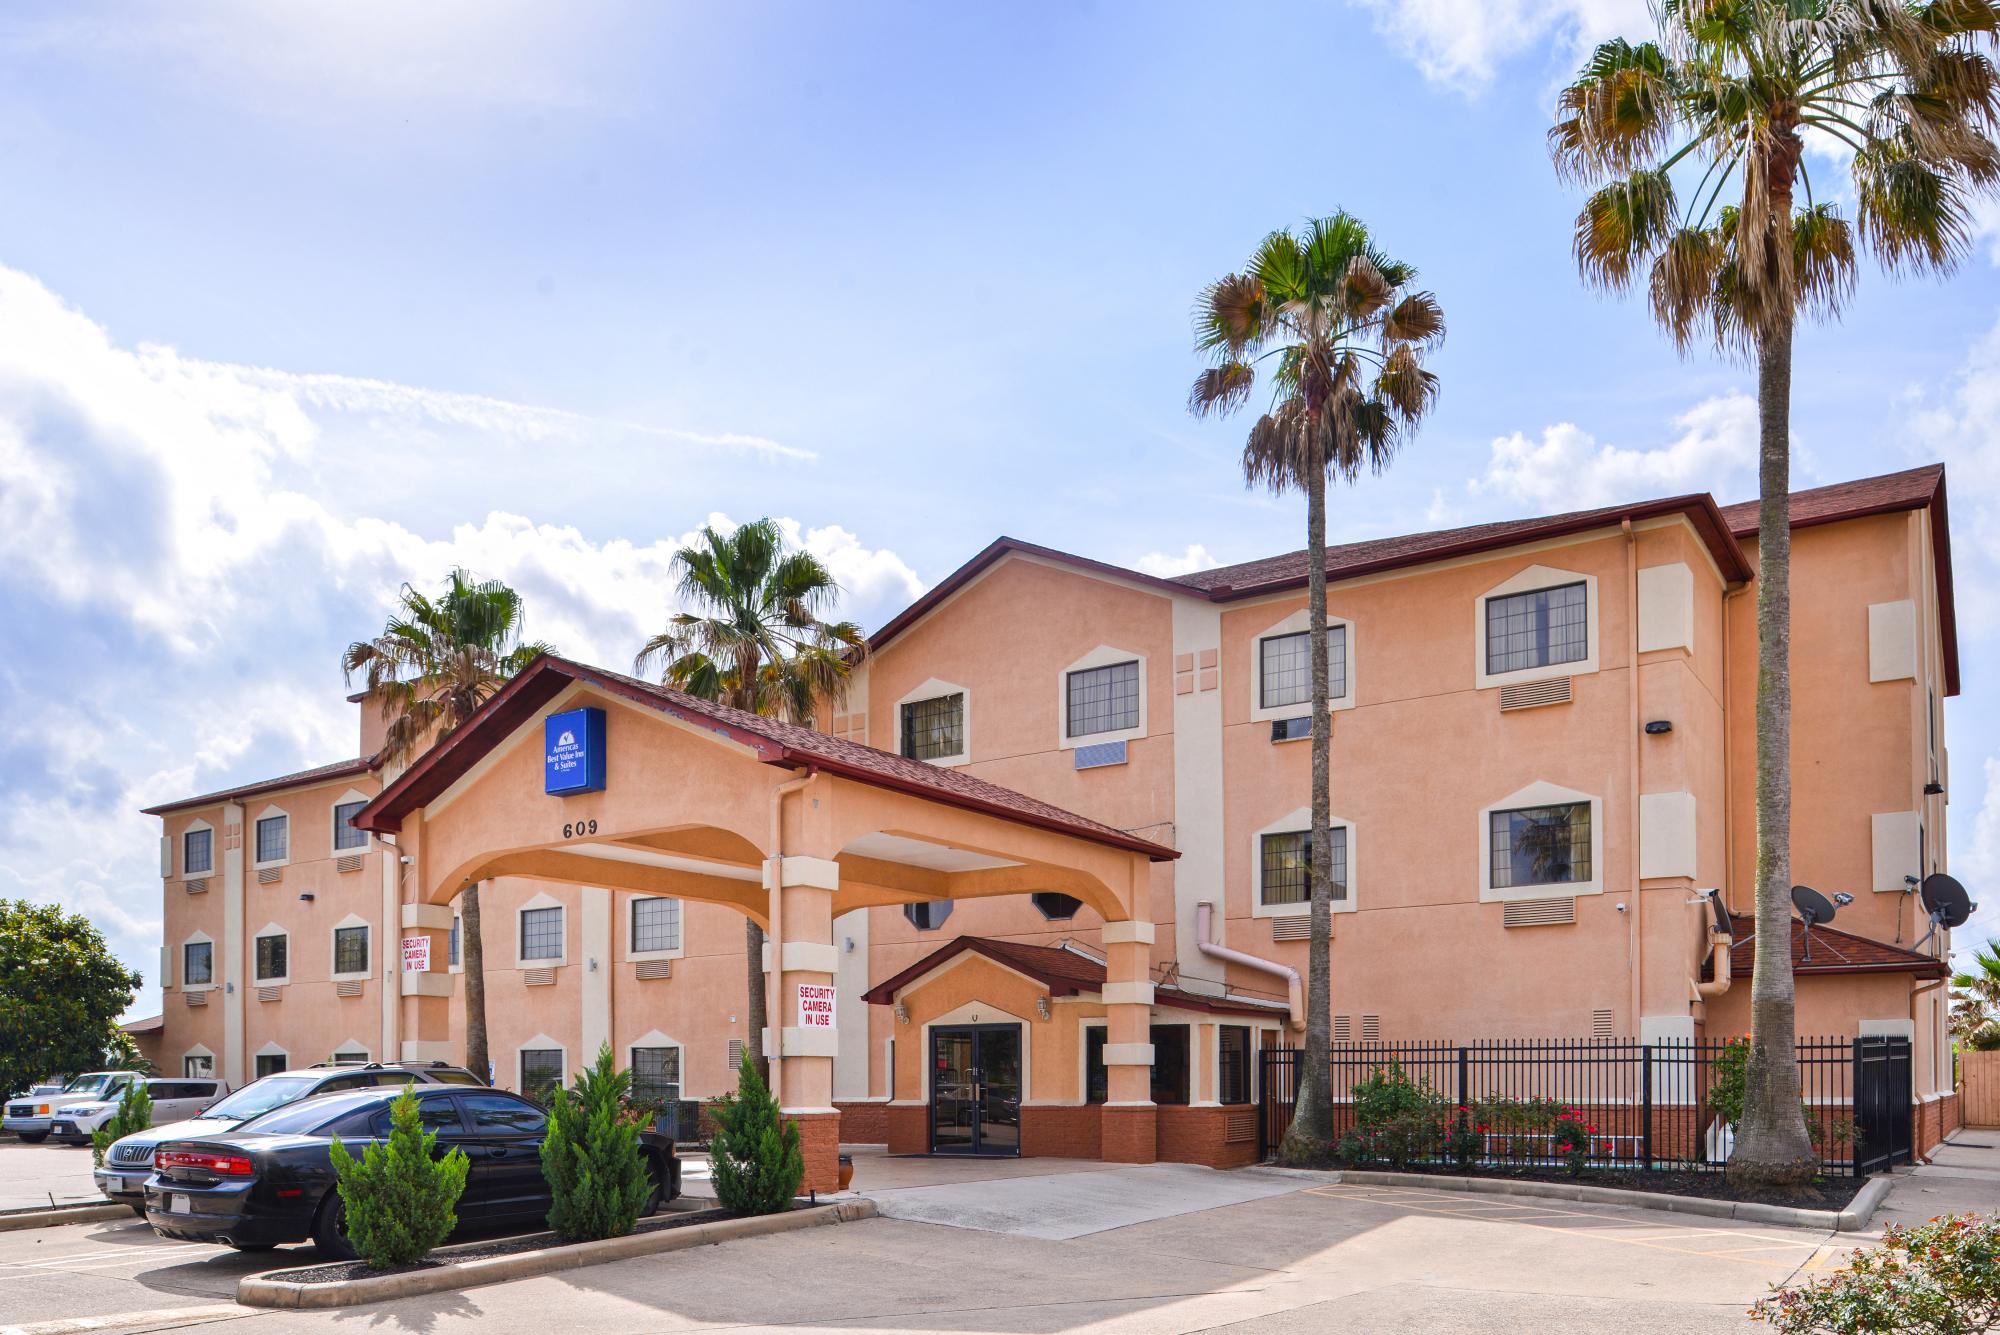 Hotel front exterior with parking and palm trees on a sunny day